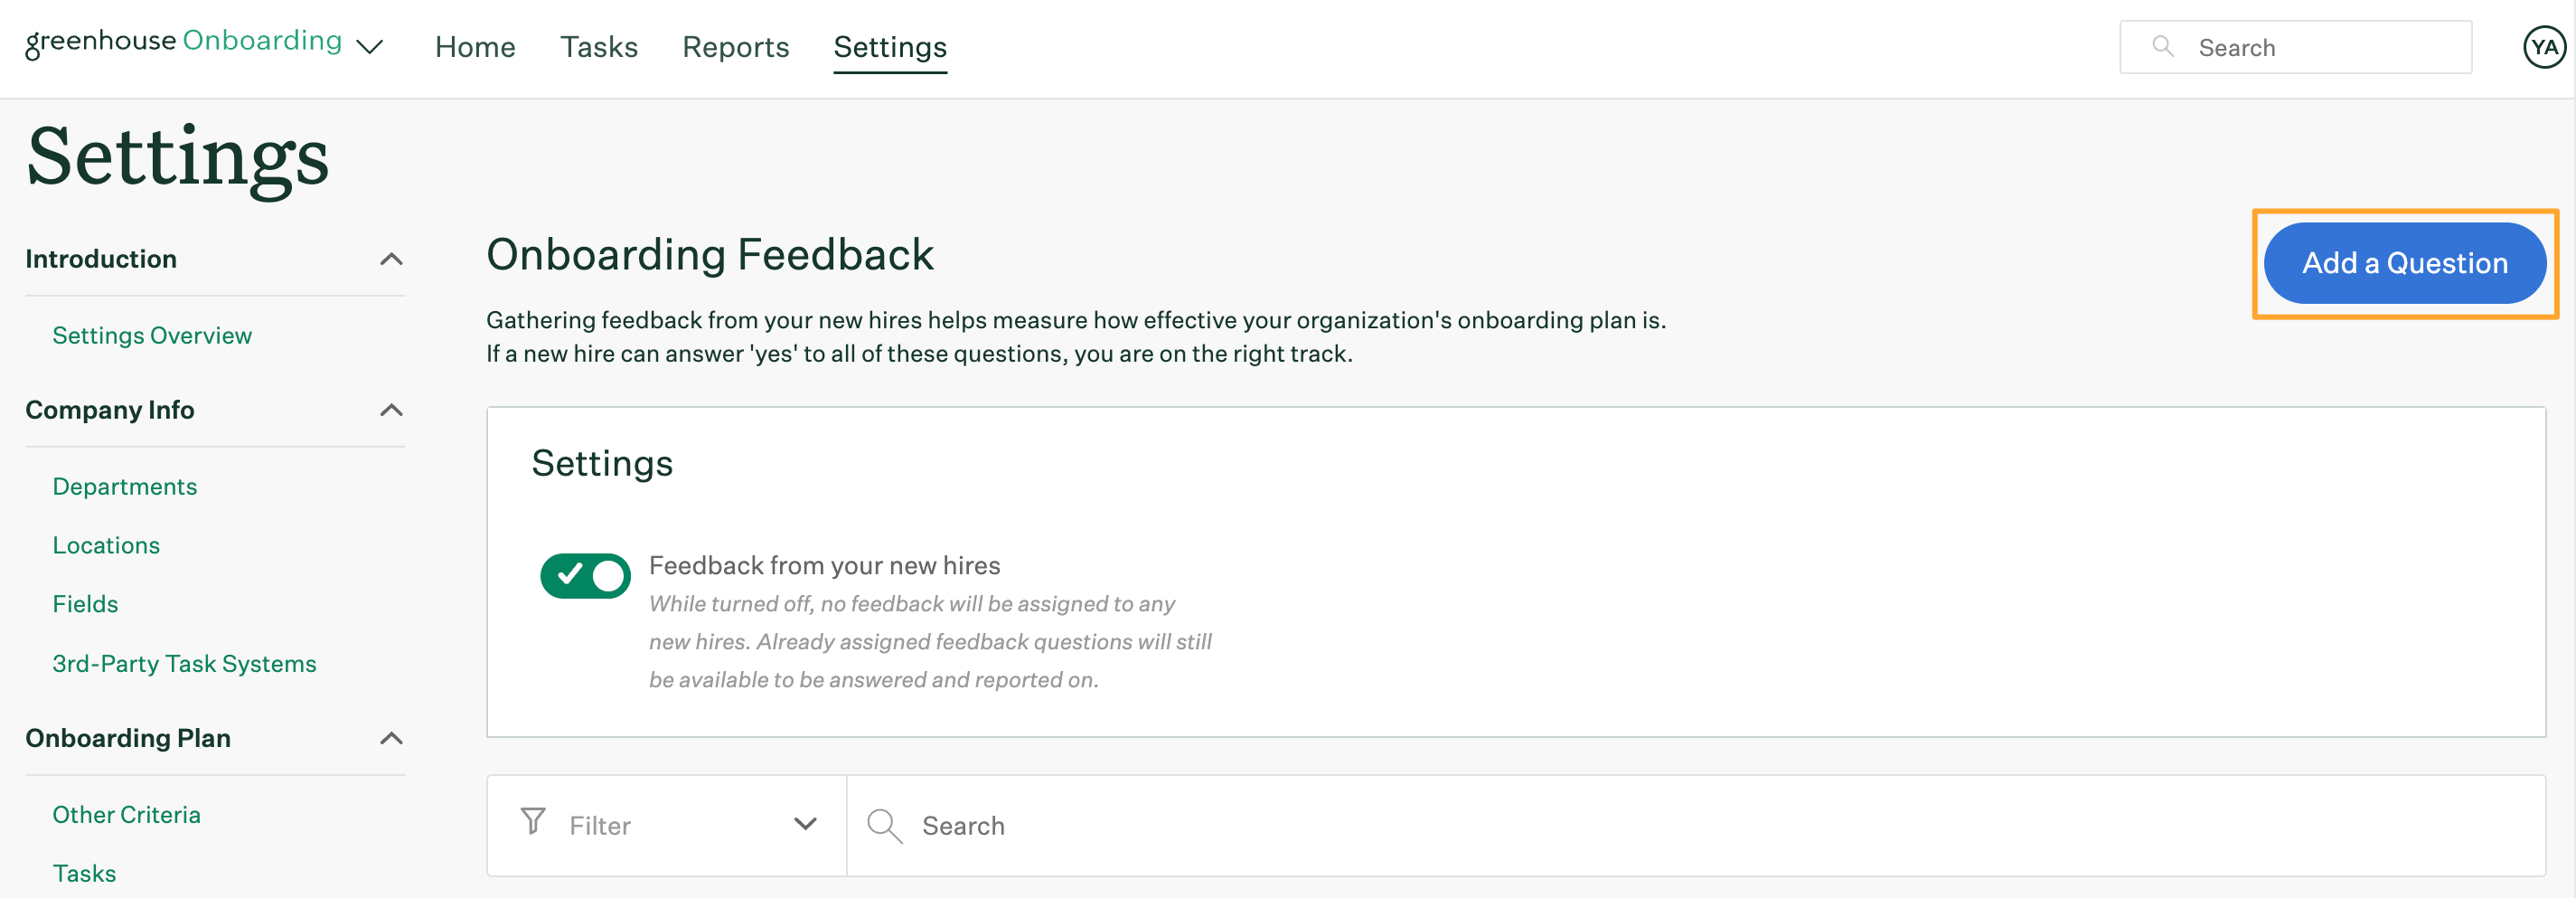 Add-a-question-button-highlighted-on-the-feedback-settings-page.png